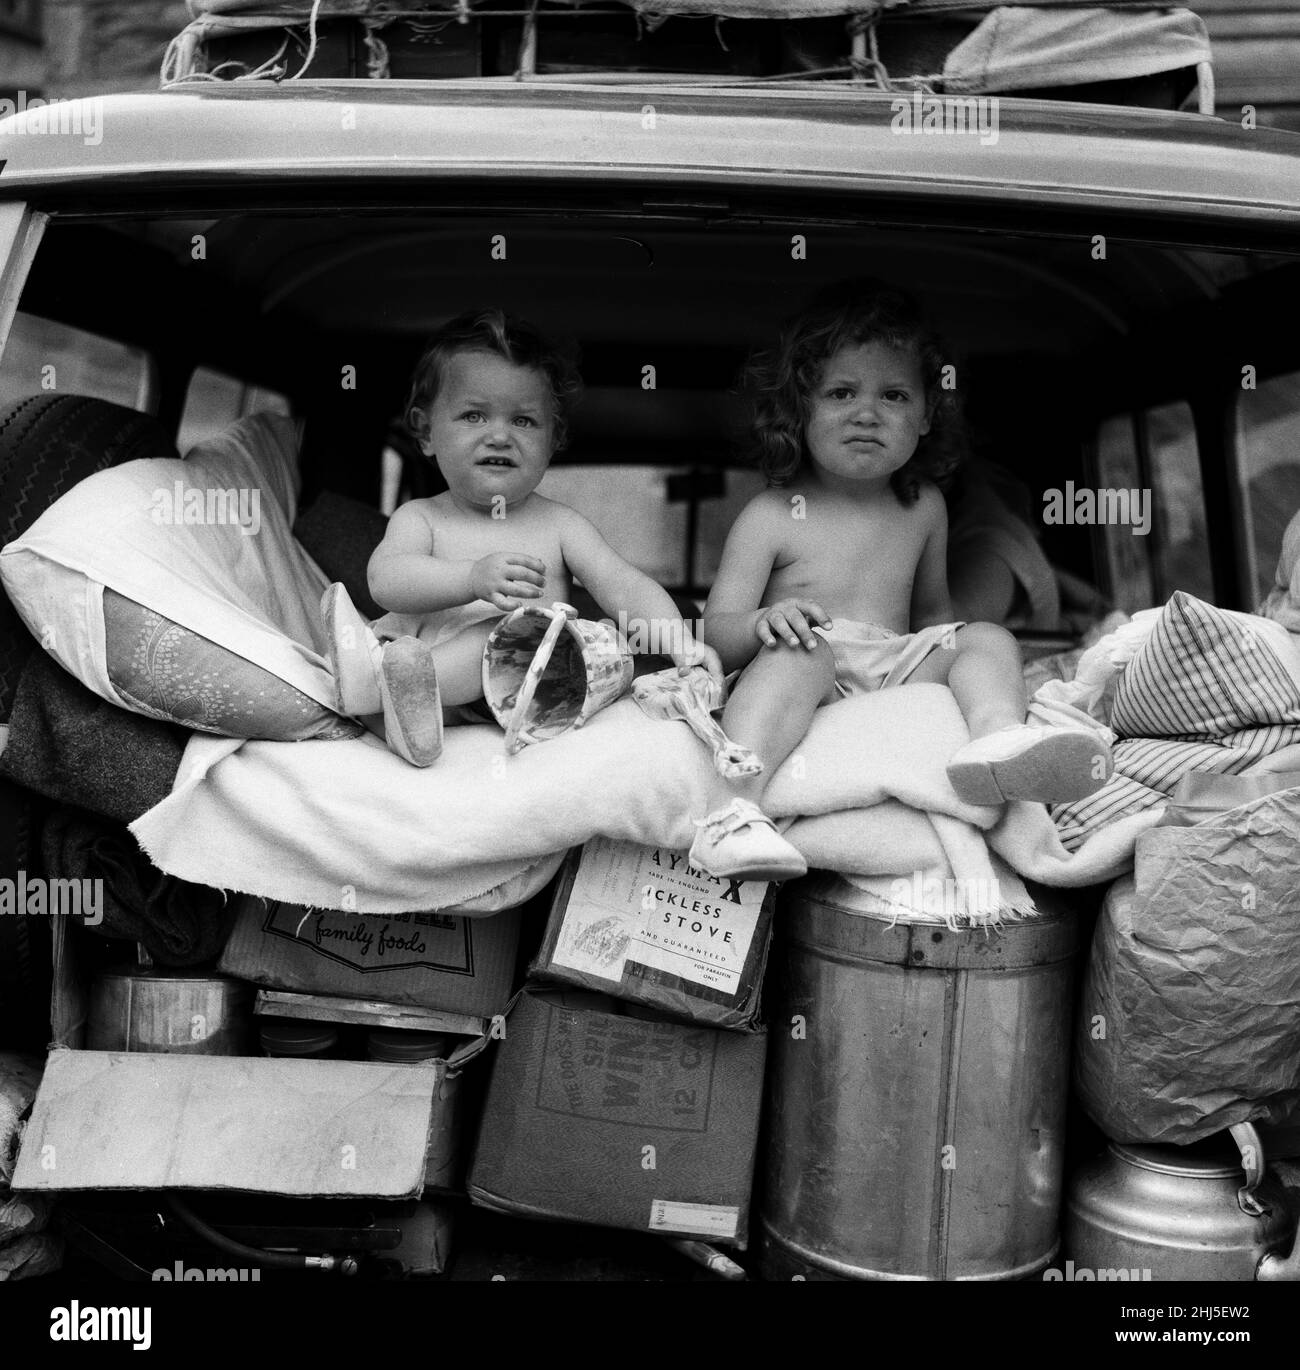 Two seasoned travellers, Paul and Julie Bridgett, aged 11 months and 2 years respectively. On a Cornish touring holiday from St Leonards-on-Sea with mummy, daddy, uncle and auntie in the van which the carrie two tents for sleeping and all the paraphernalia for camping out. The two toddlers keep in a bed at the rear of the van and are so comfortable there that they doze during travel and use it as an observation post when its raining . Mummy is on the seat just behind them to make sure they are safe. The pram is tied on the van roof. They are pictured in their usual position in the van at Looe, Stock Photo